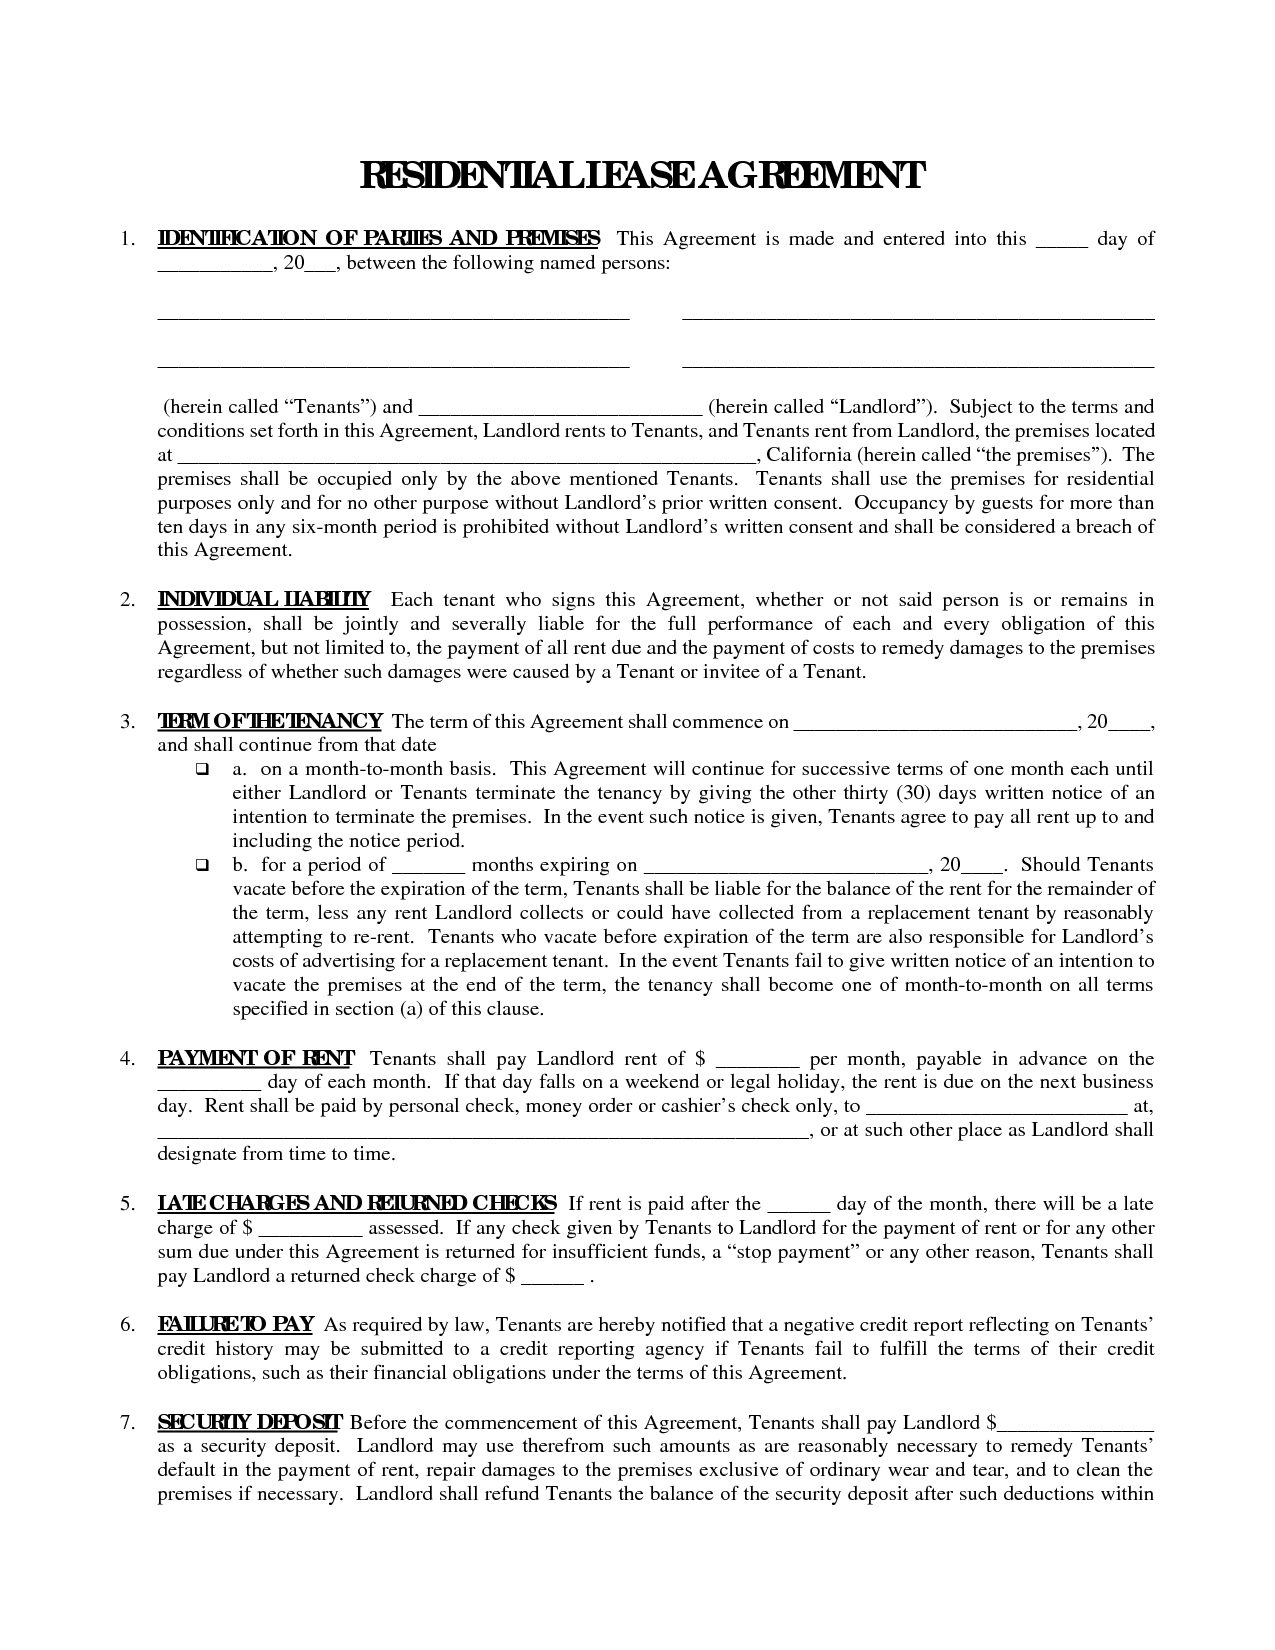 Printable Residential Free House Lease Agreement | Residential Lease - Free Printable California Residential Lease Agreement